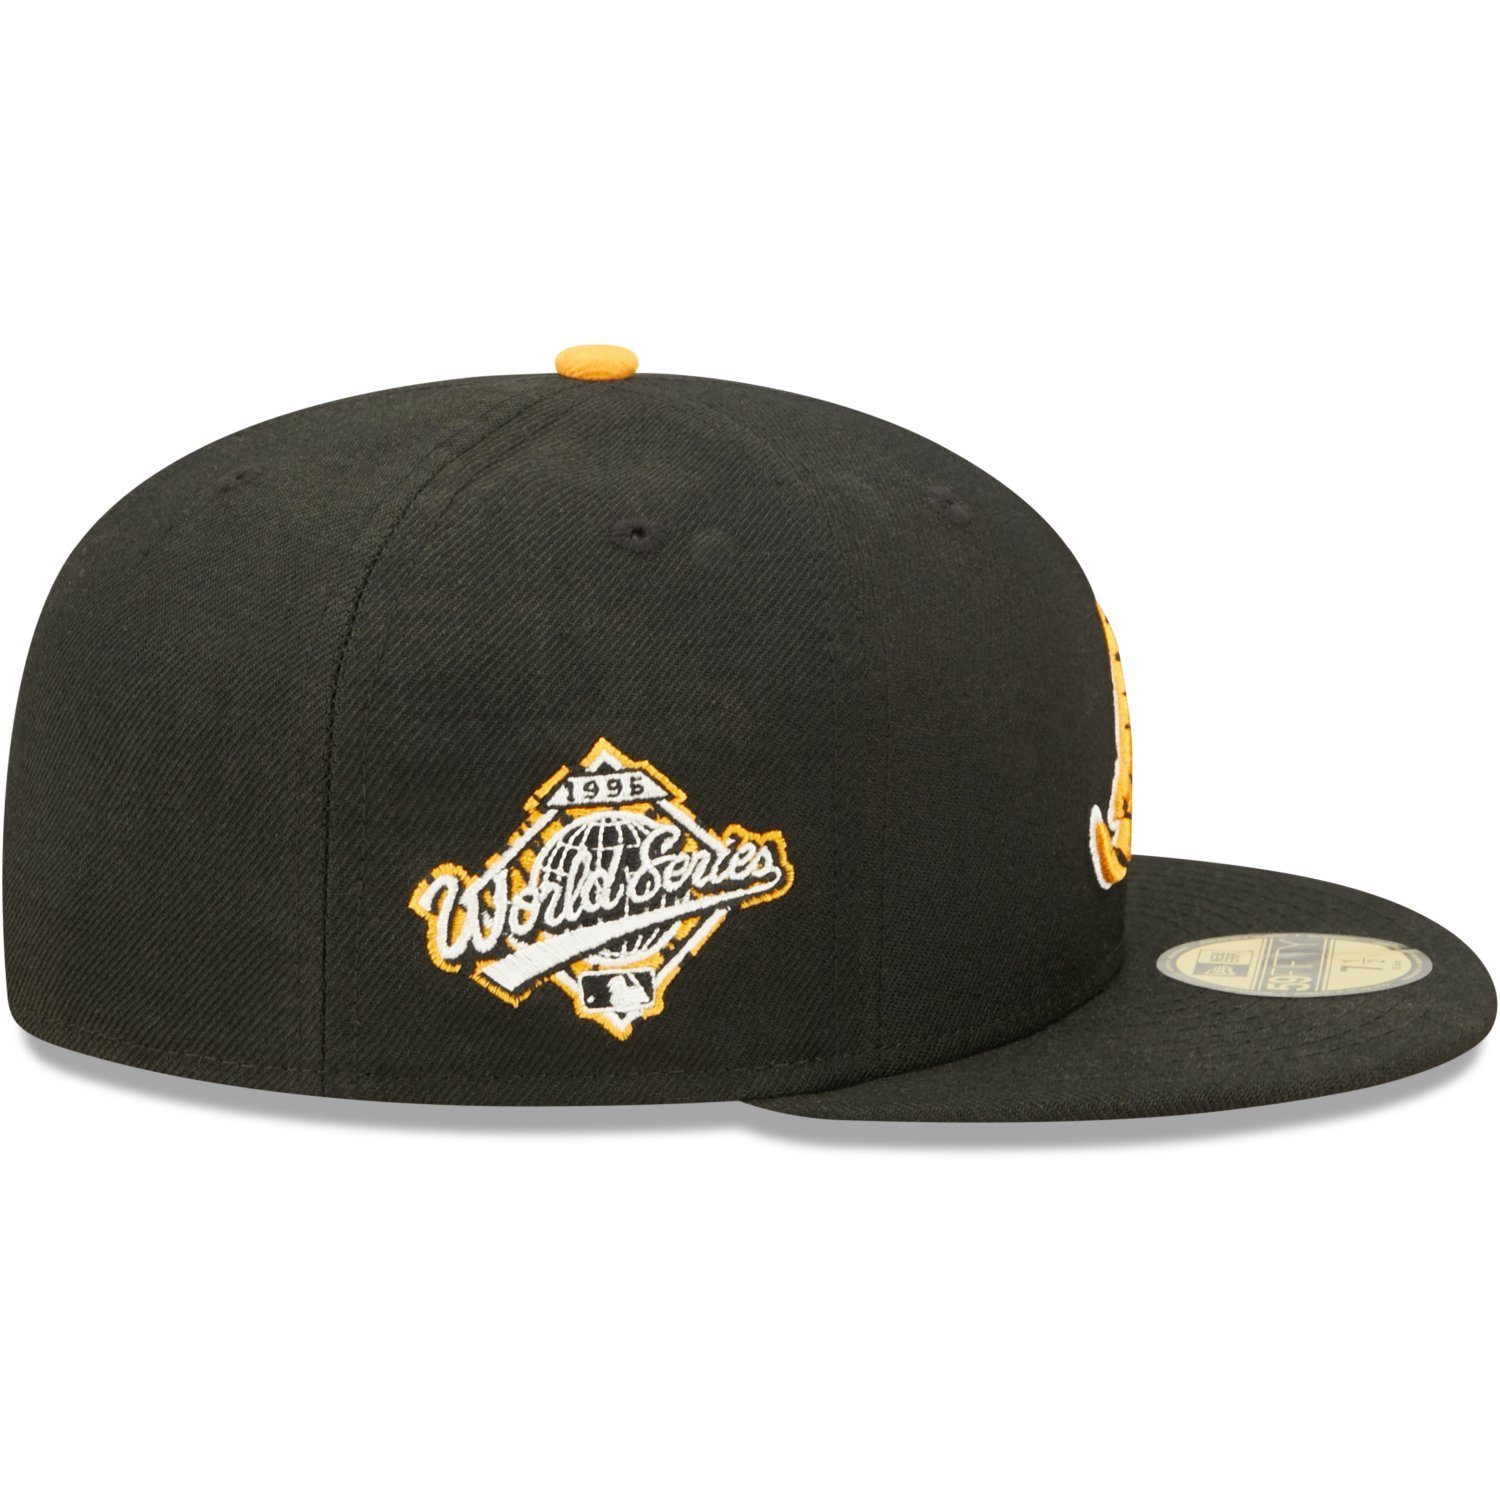 New 59Fifty Era Braves Cap Atlanta Fitted TIGERFILL